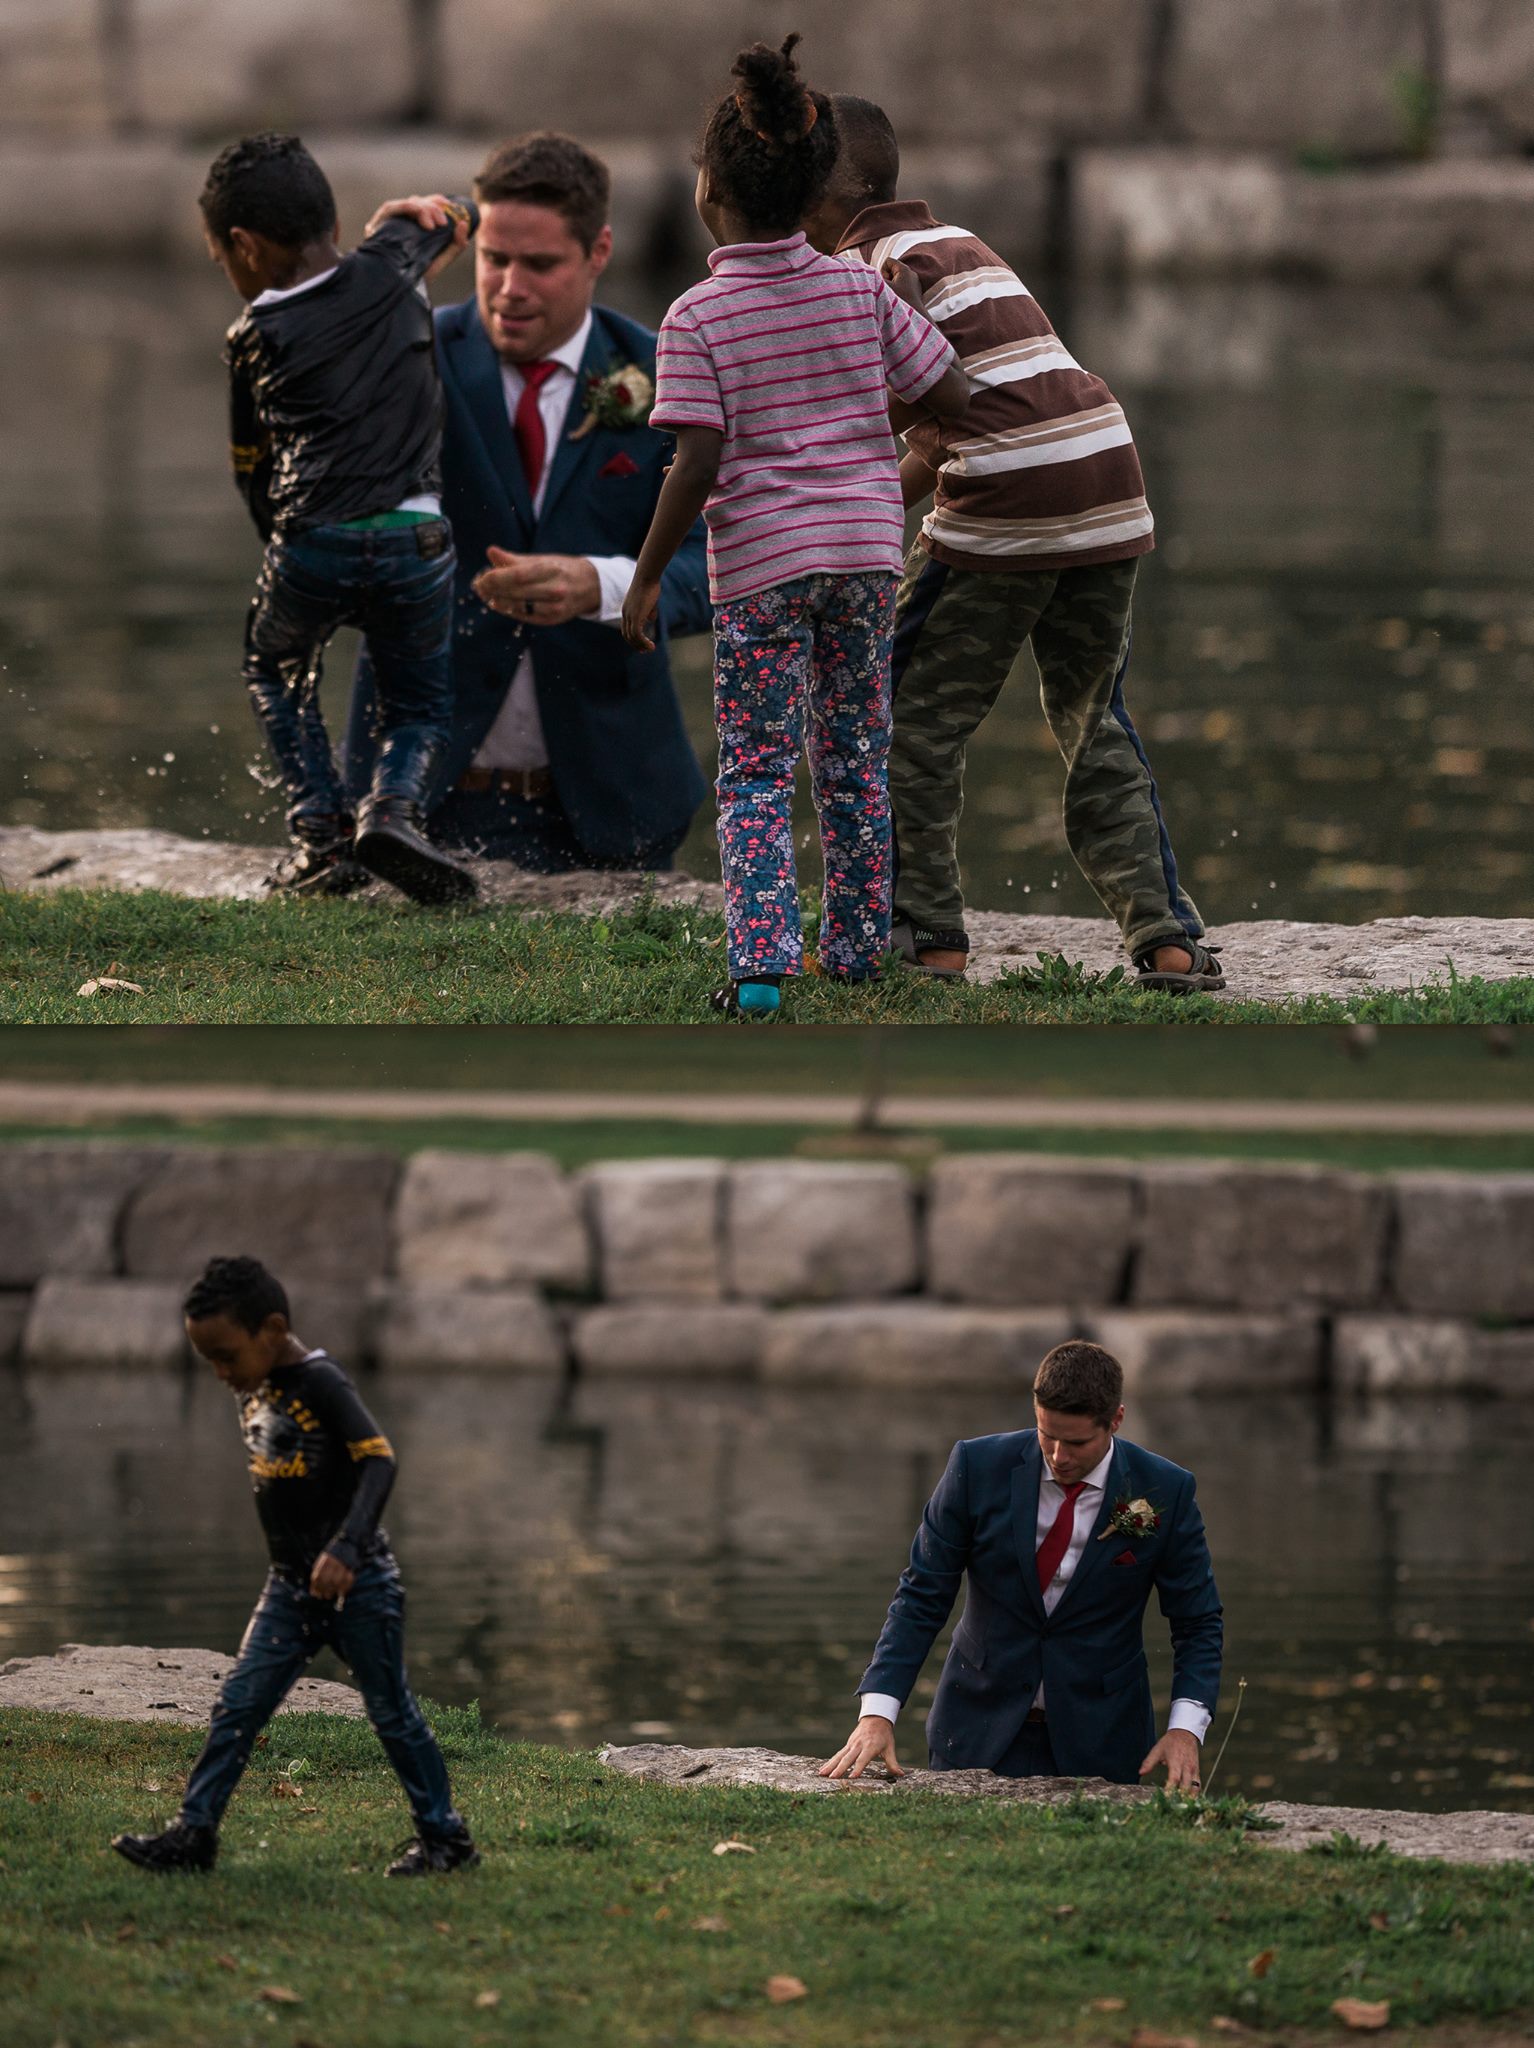 A groom saves a child from drowning.